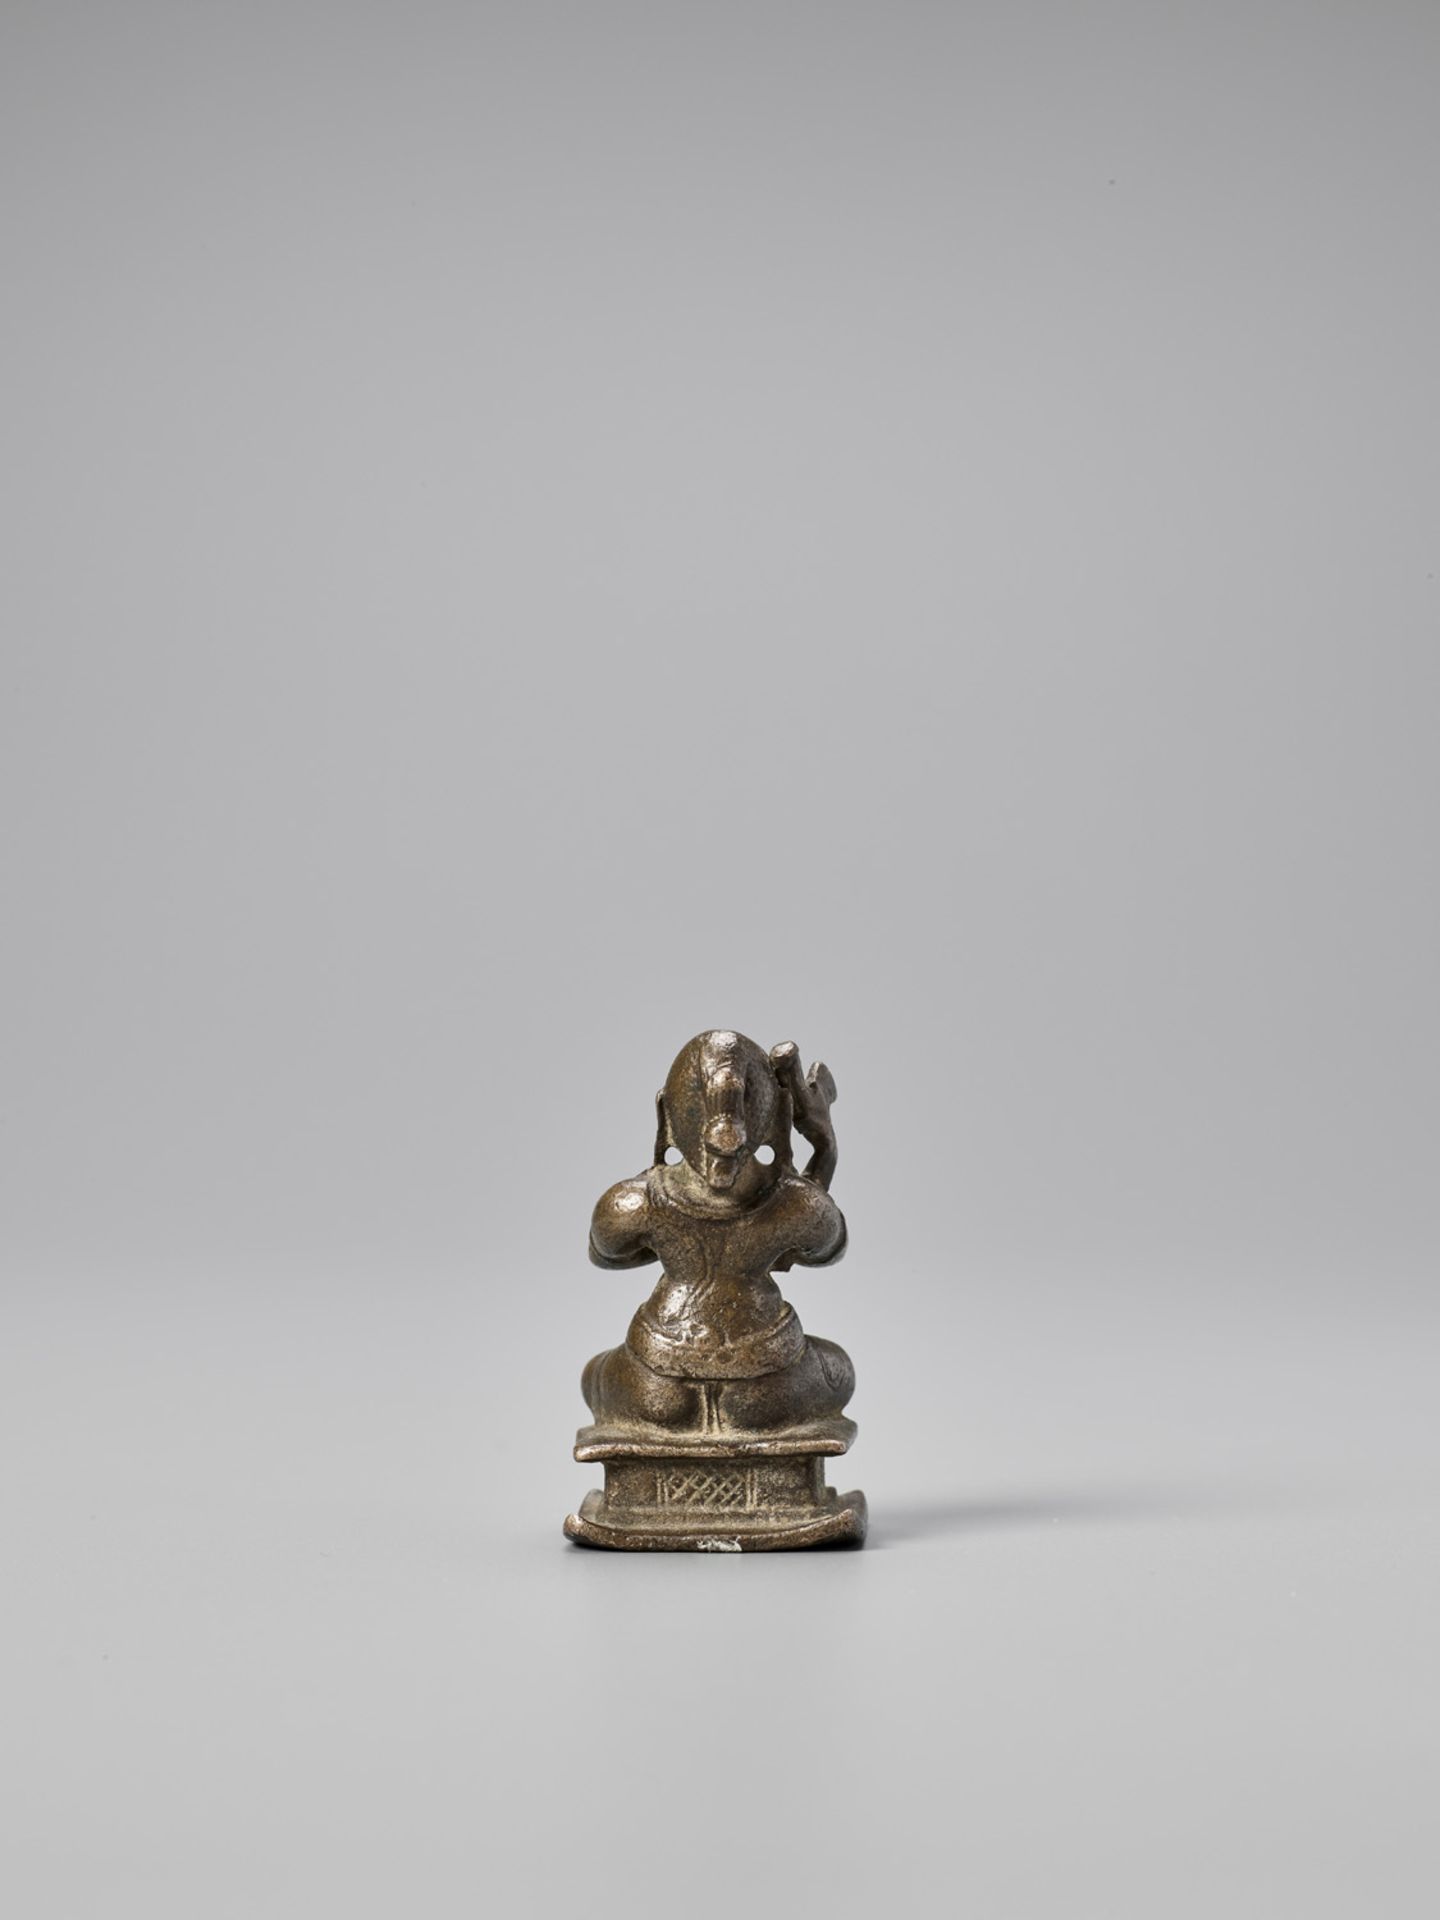 TWO SMALL INDIAN BRONZE FIGURES, 19TH CENTURY - Image 9 of 10